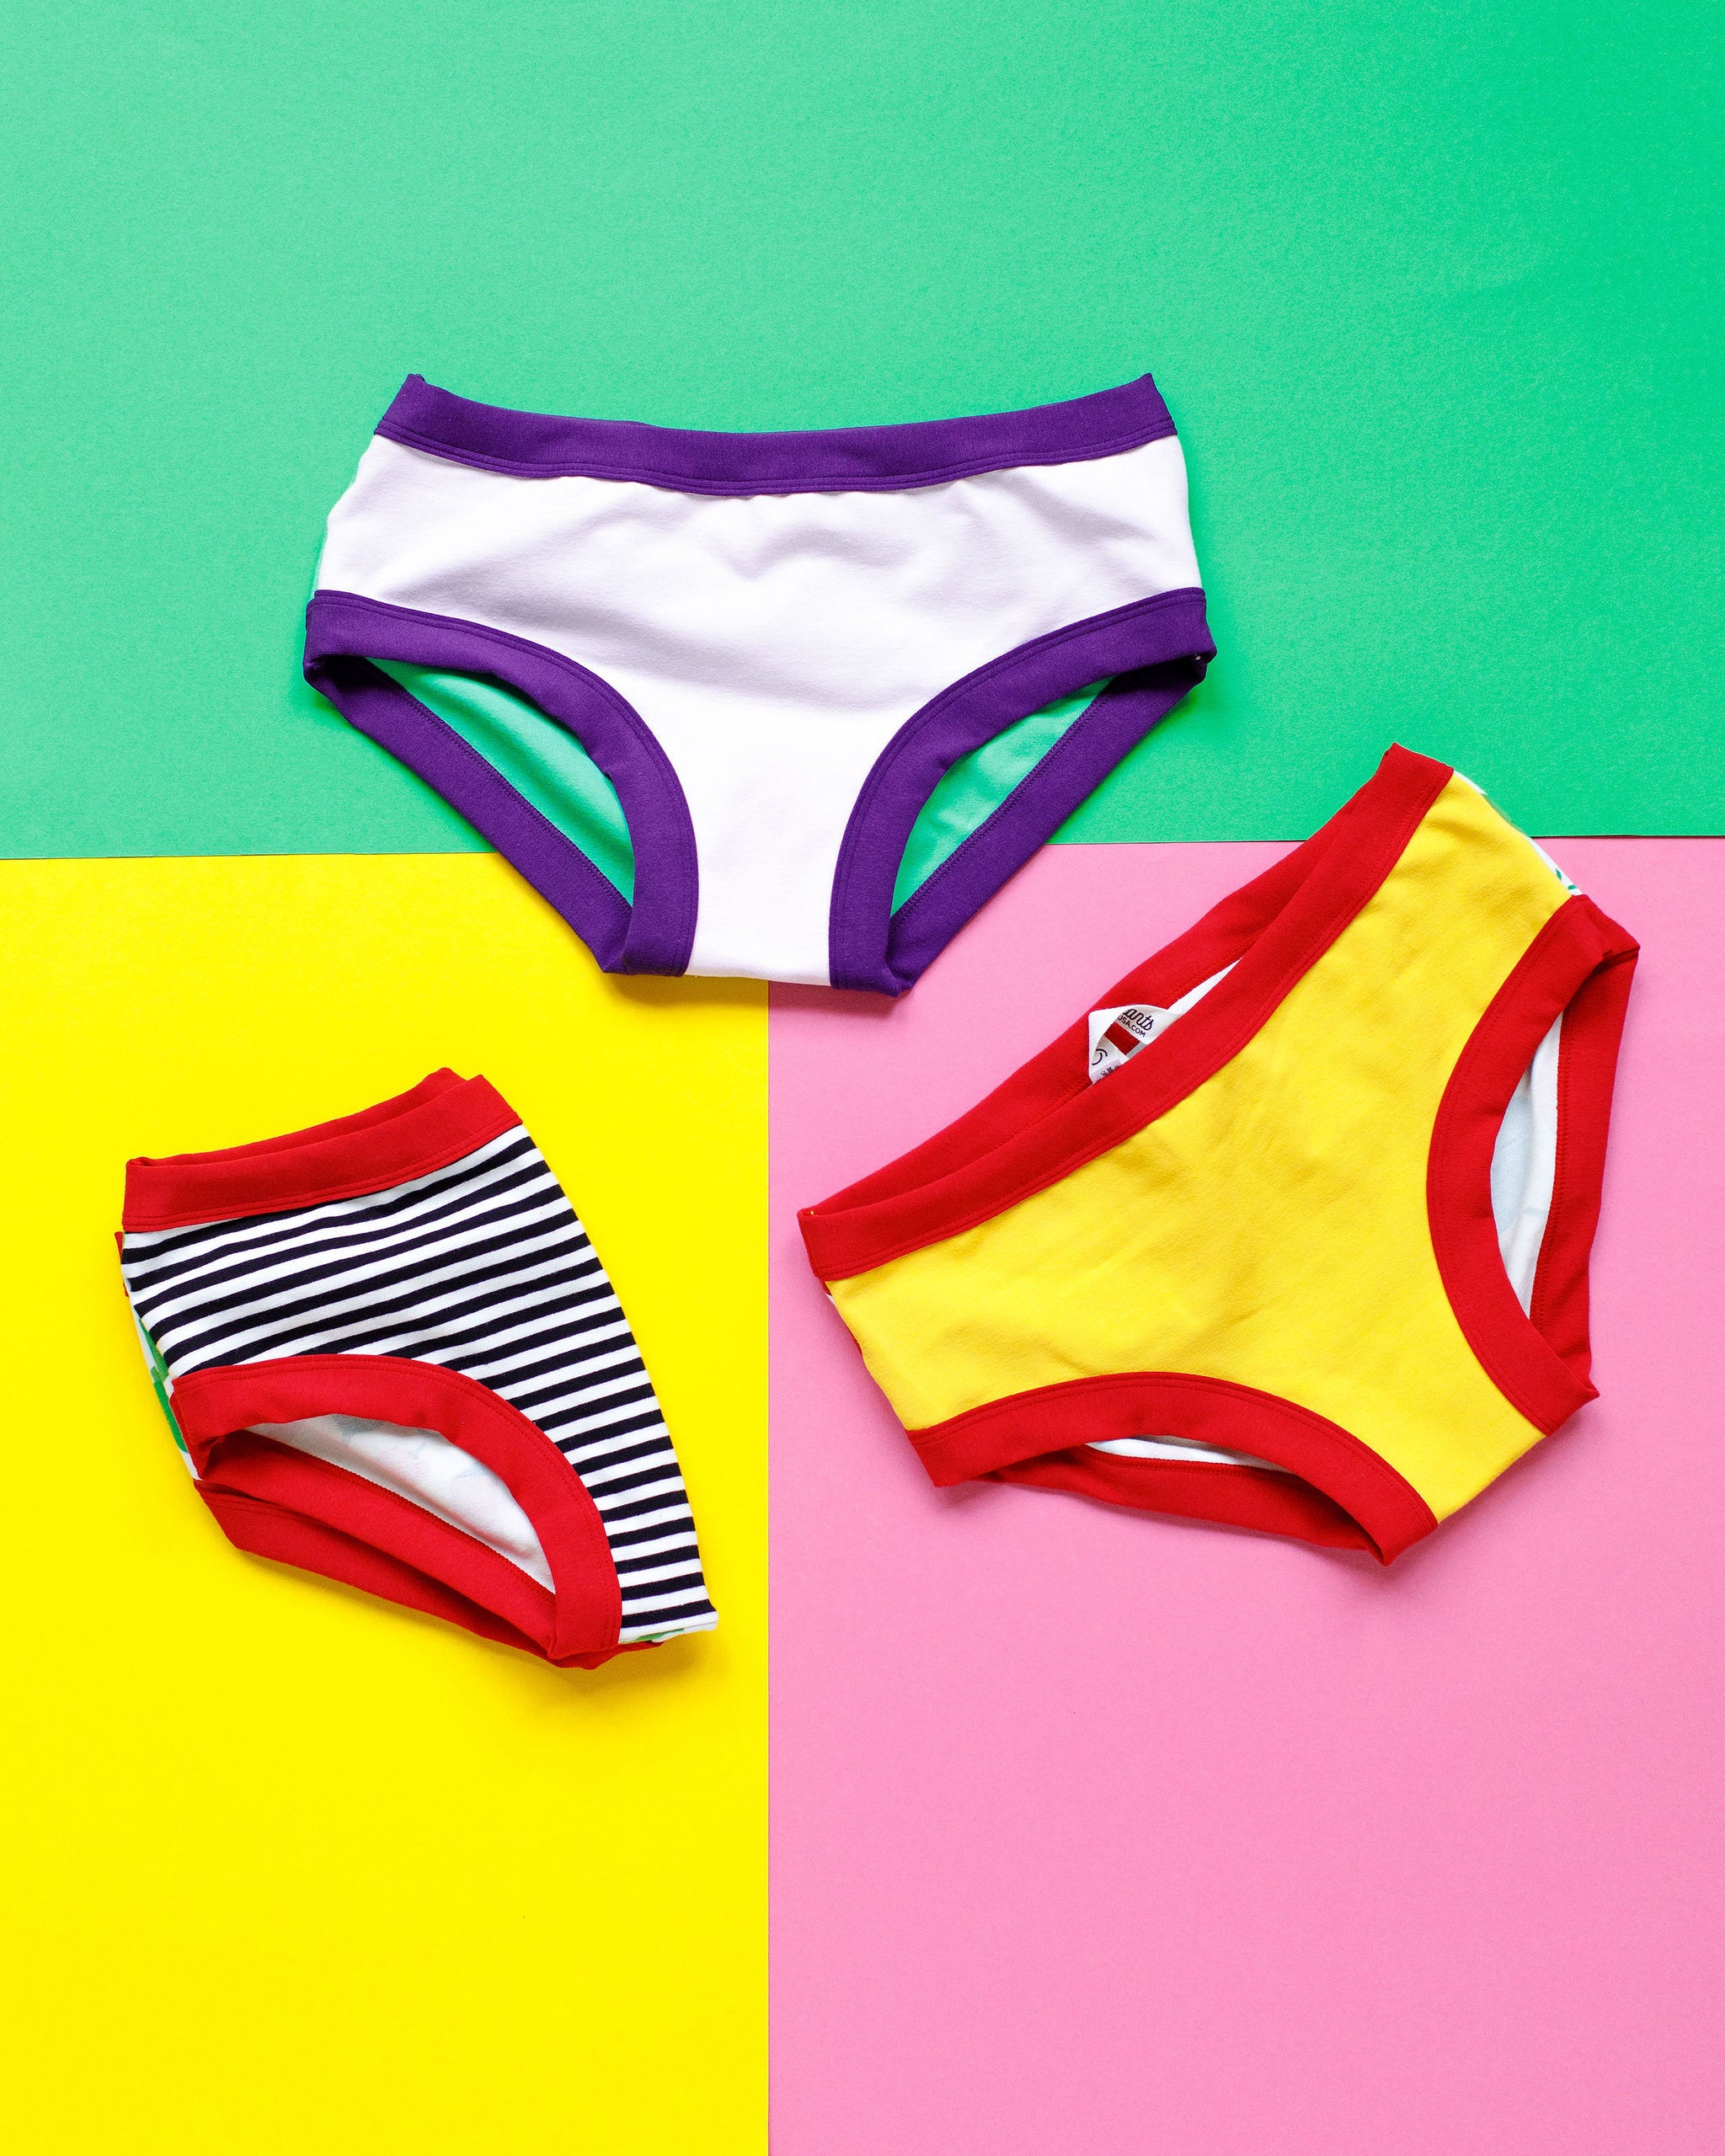 Flat lay of Thunderpants Hipster style underwear - combination of different solids and prints.